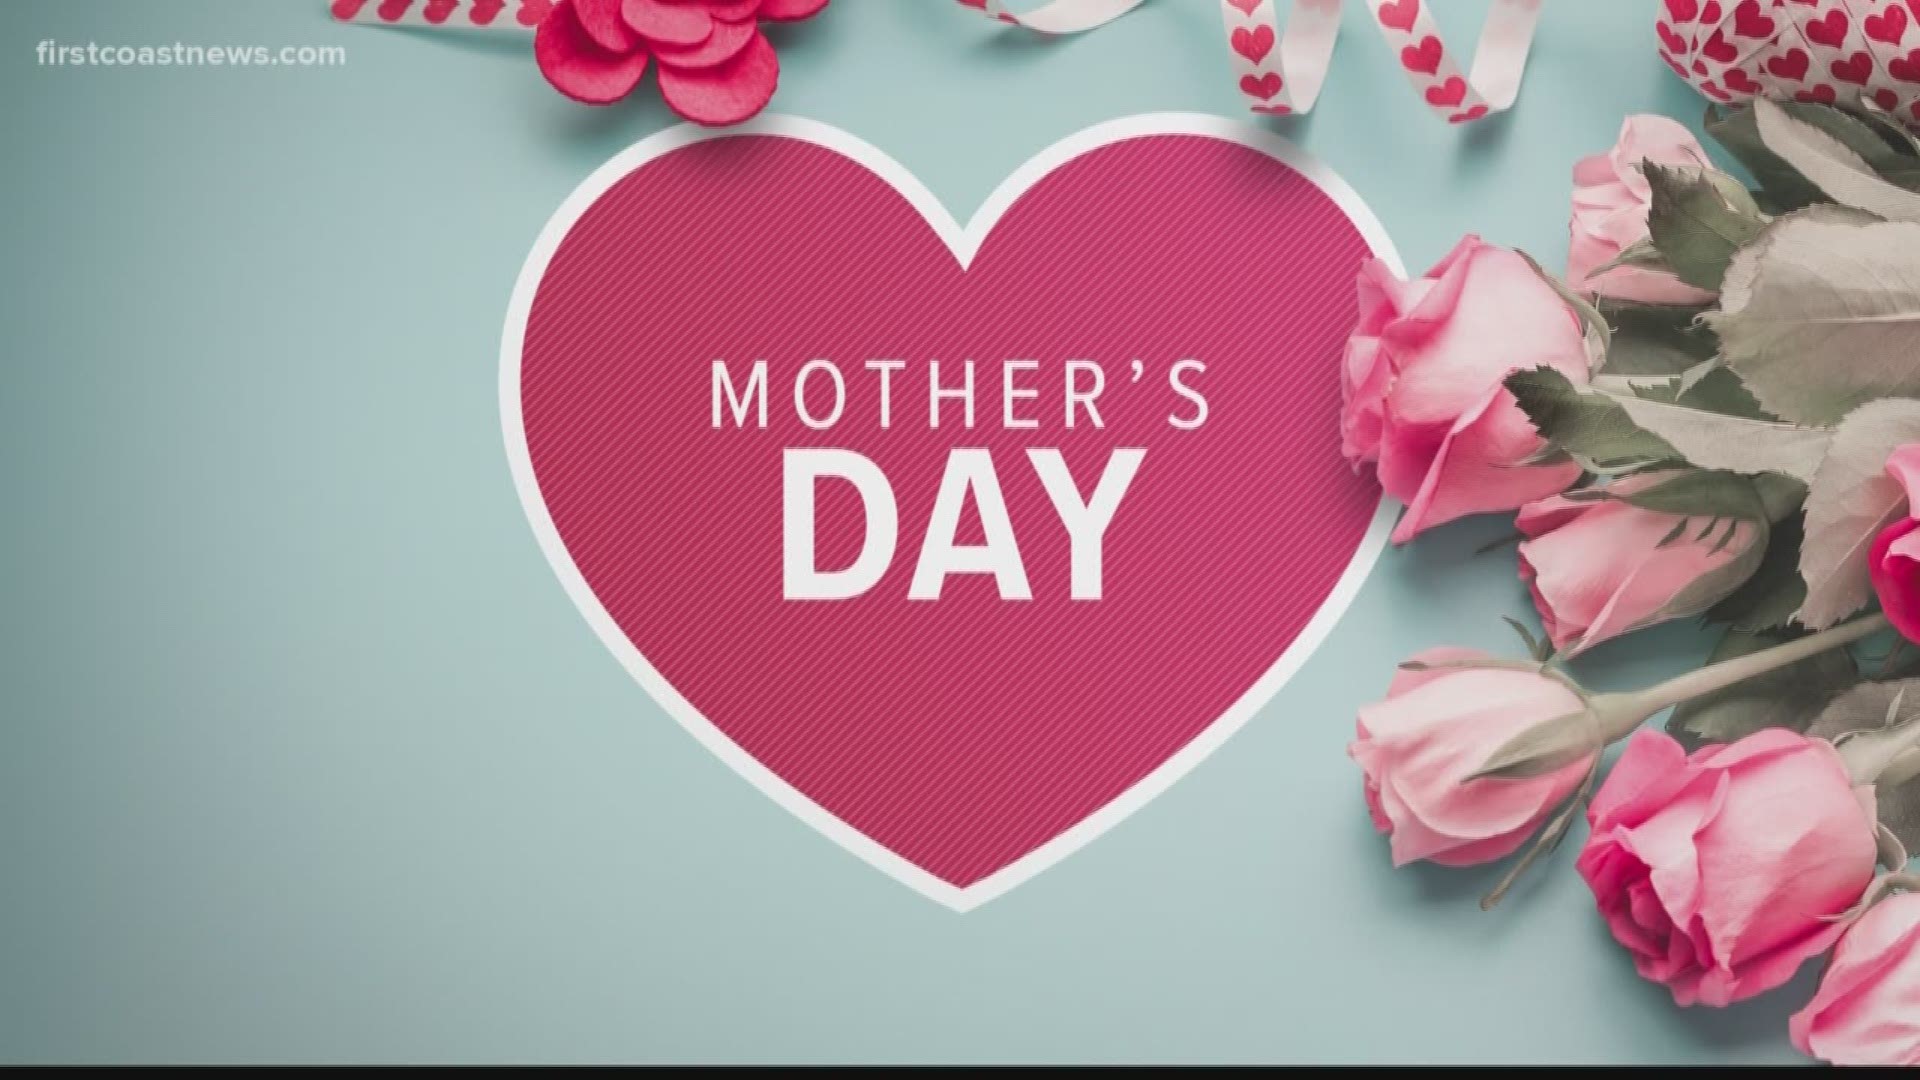 Happy Mother's Day from our team at Good Morning Jacksonville!